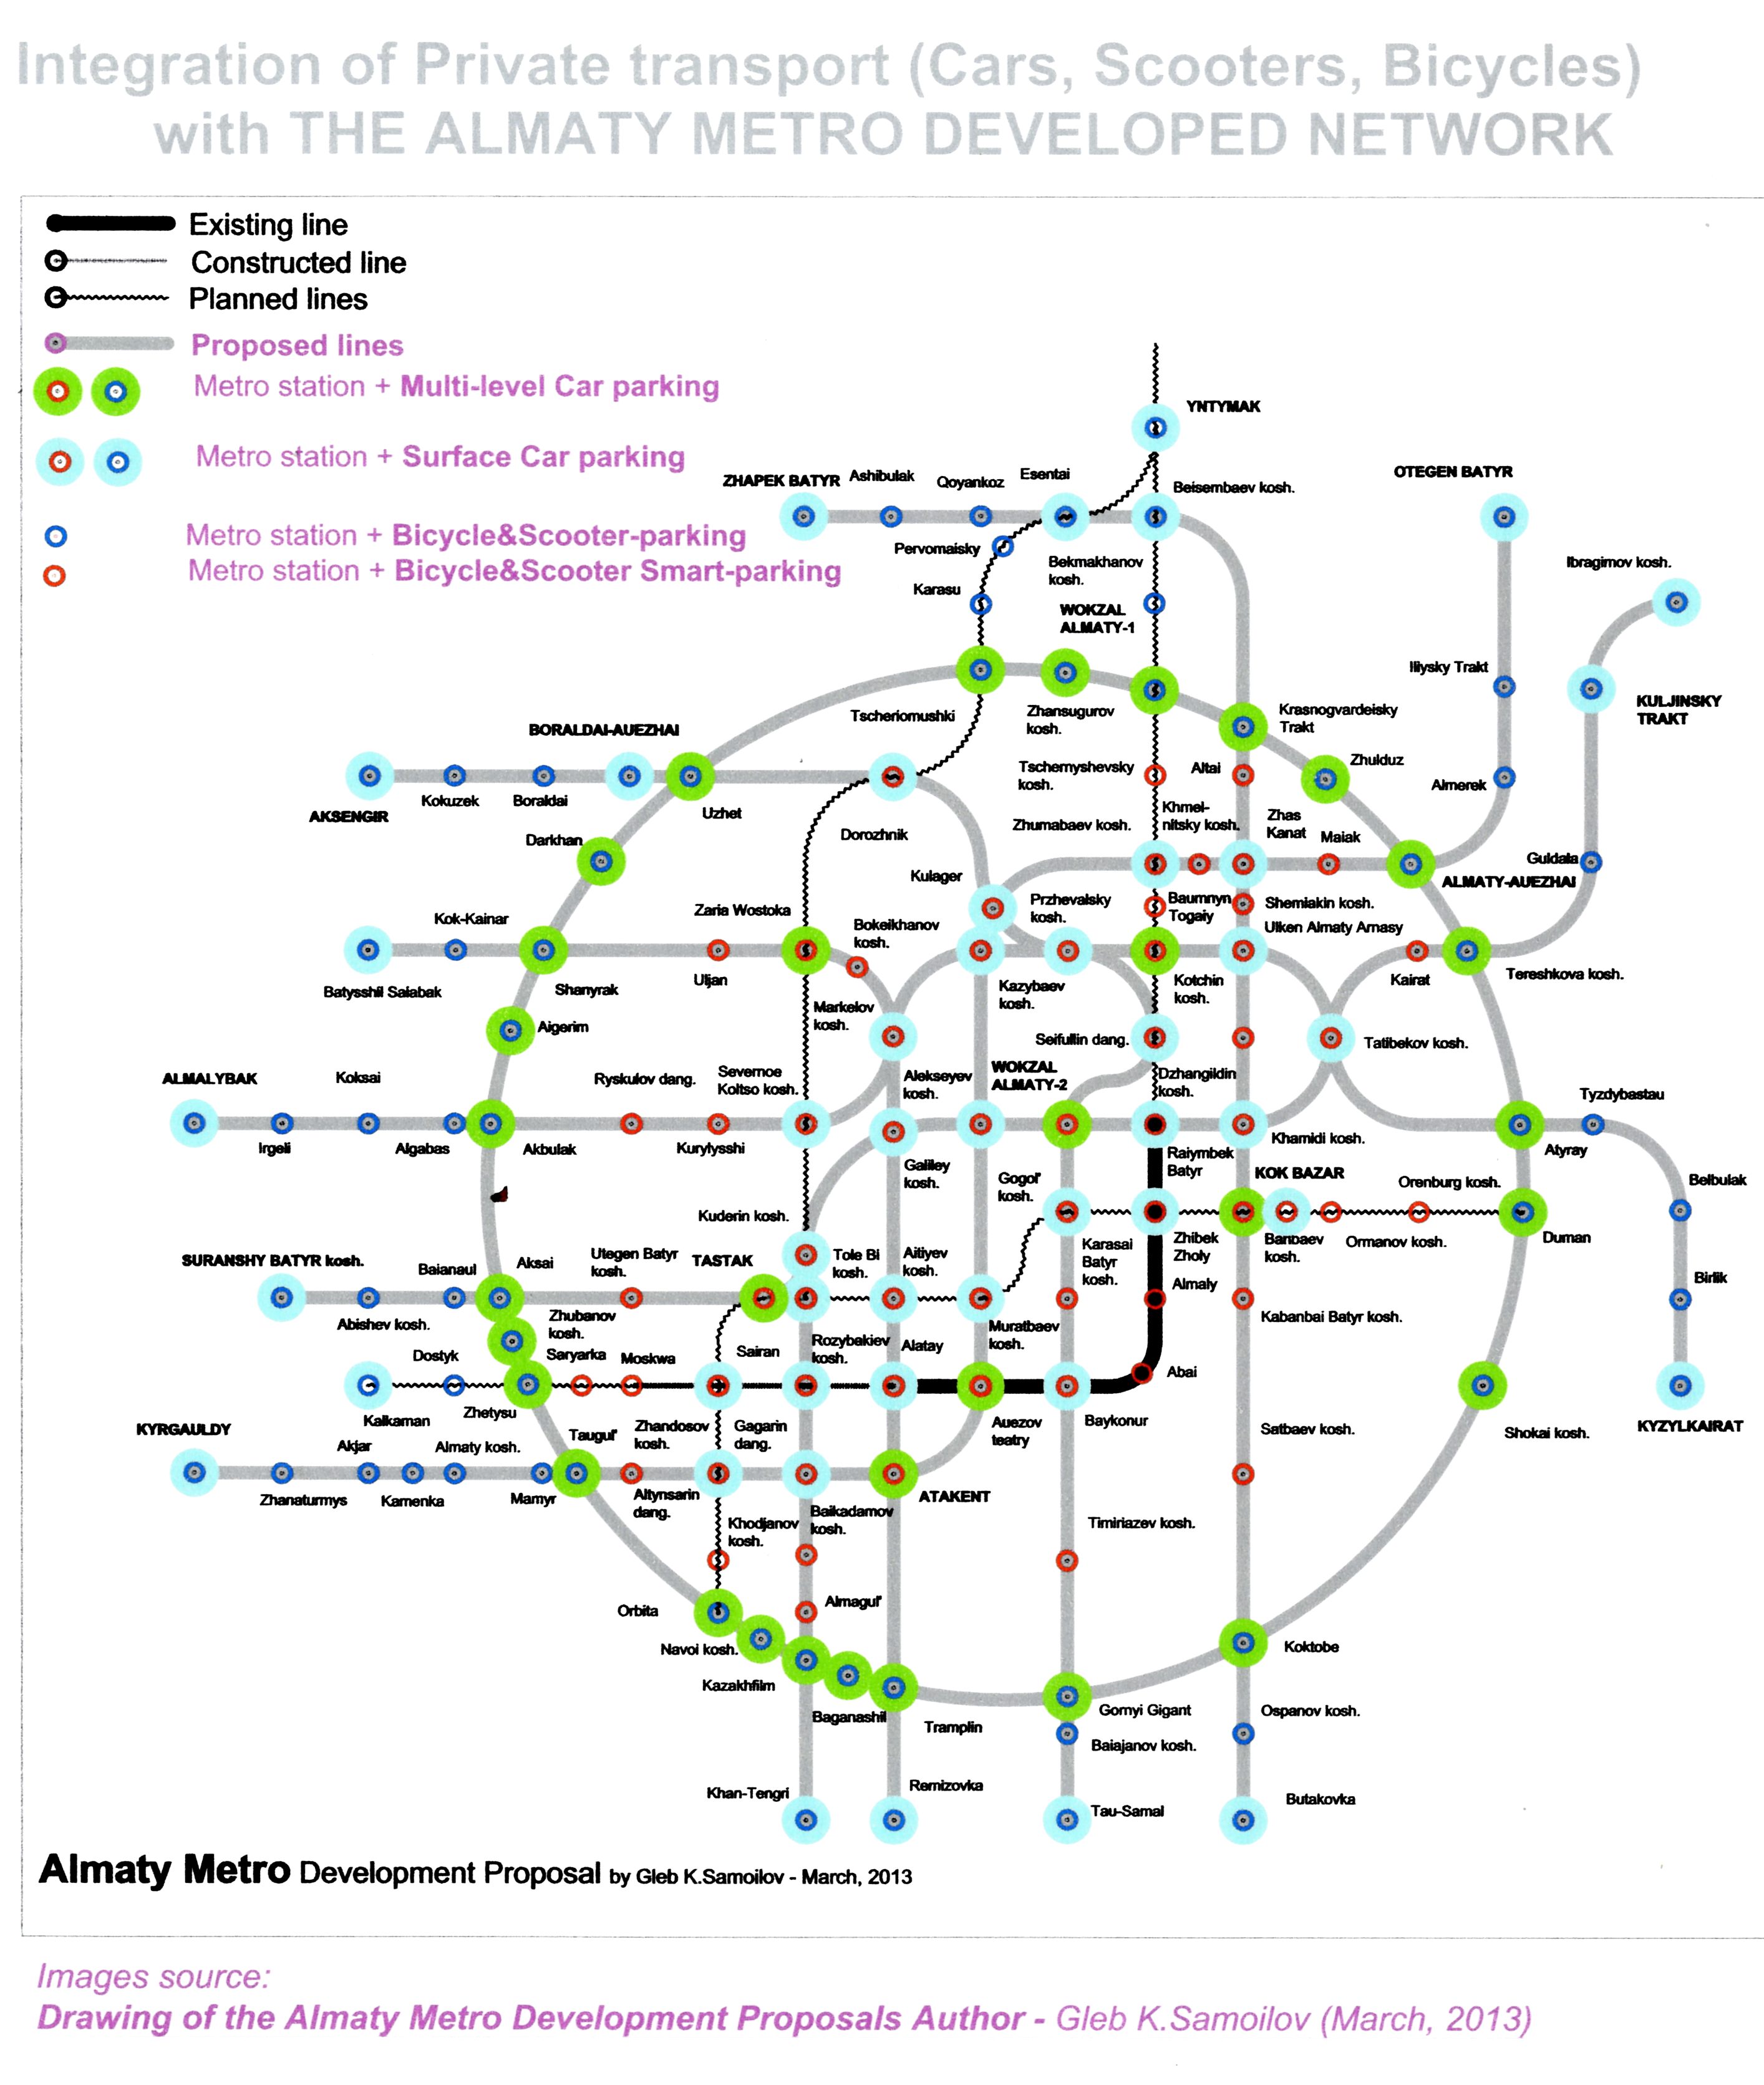 The Almaty Metro Integration with Private transport - cars, scooters, bicycles